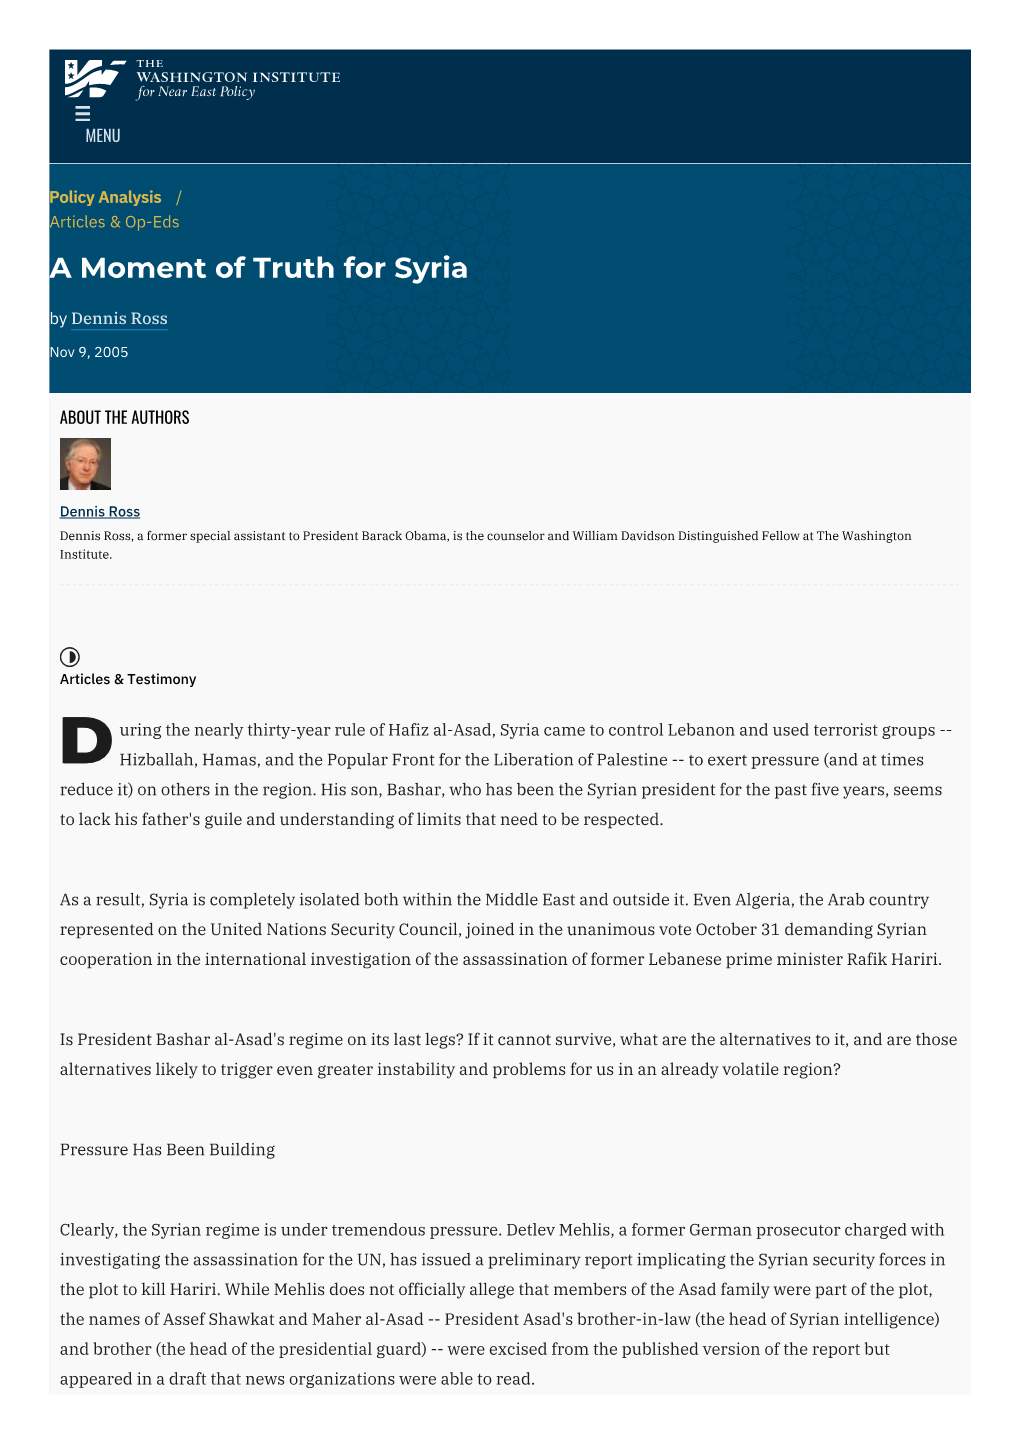 A Moment of Truth for Syria | the Washington Institute